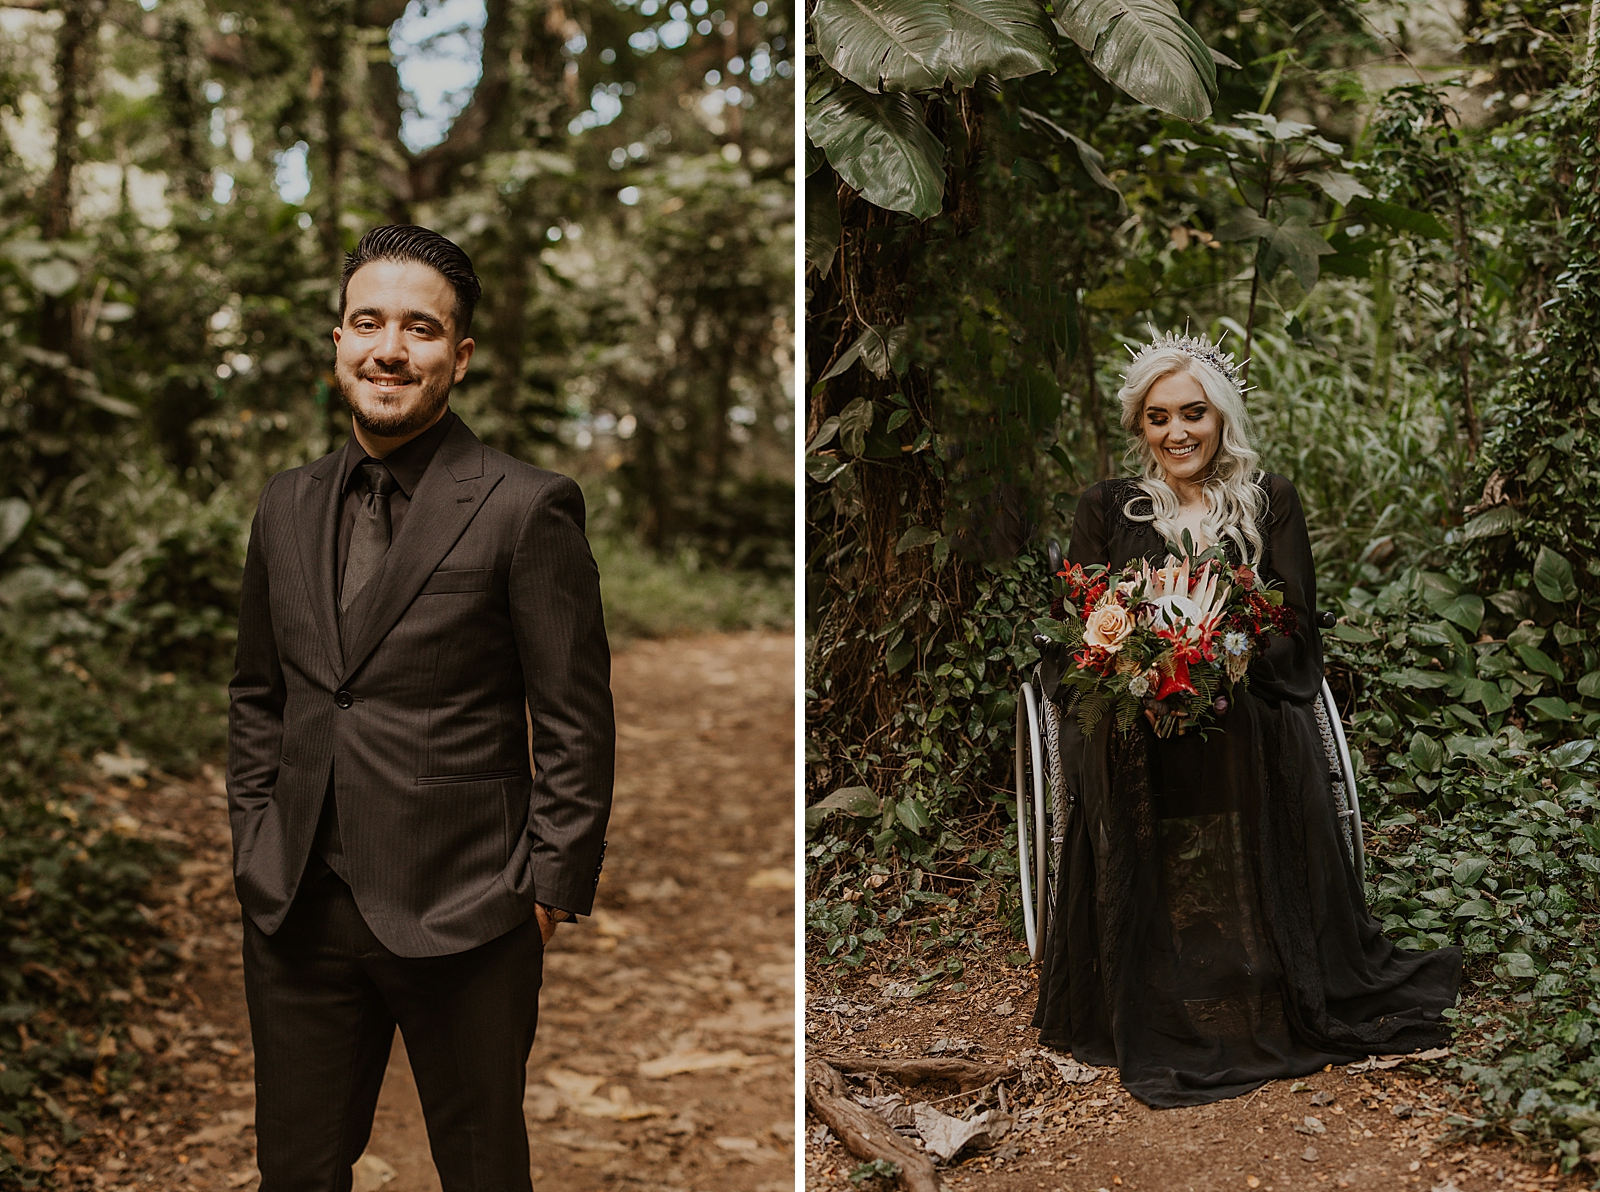 Individual portraits of wheel-chaired Bride and Groom out in green tropical forrest